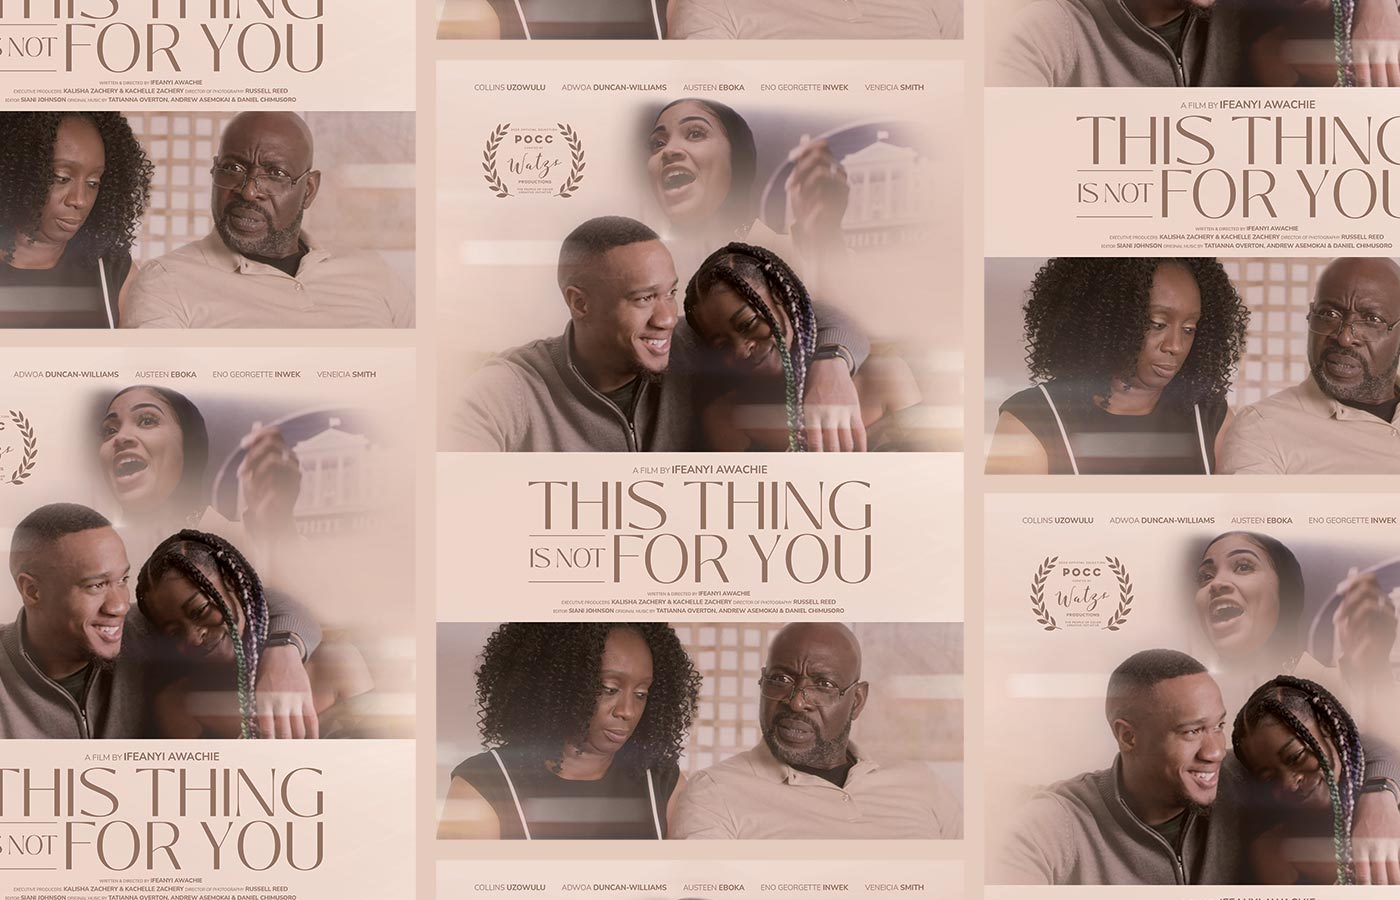 Watzs Productions' This Thing Is Not For You film poster.